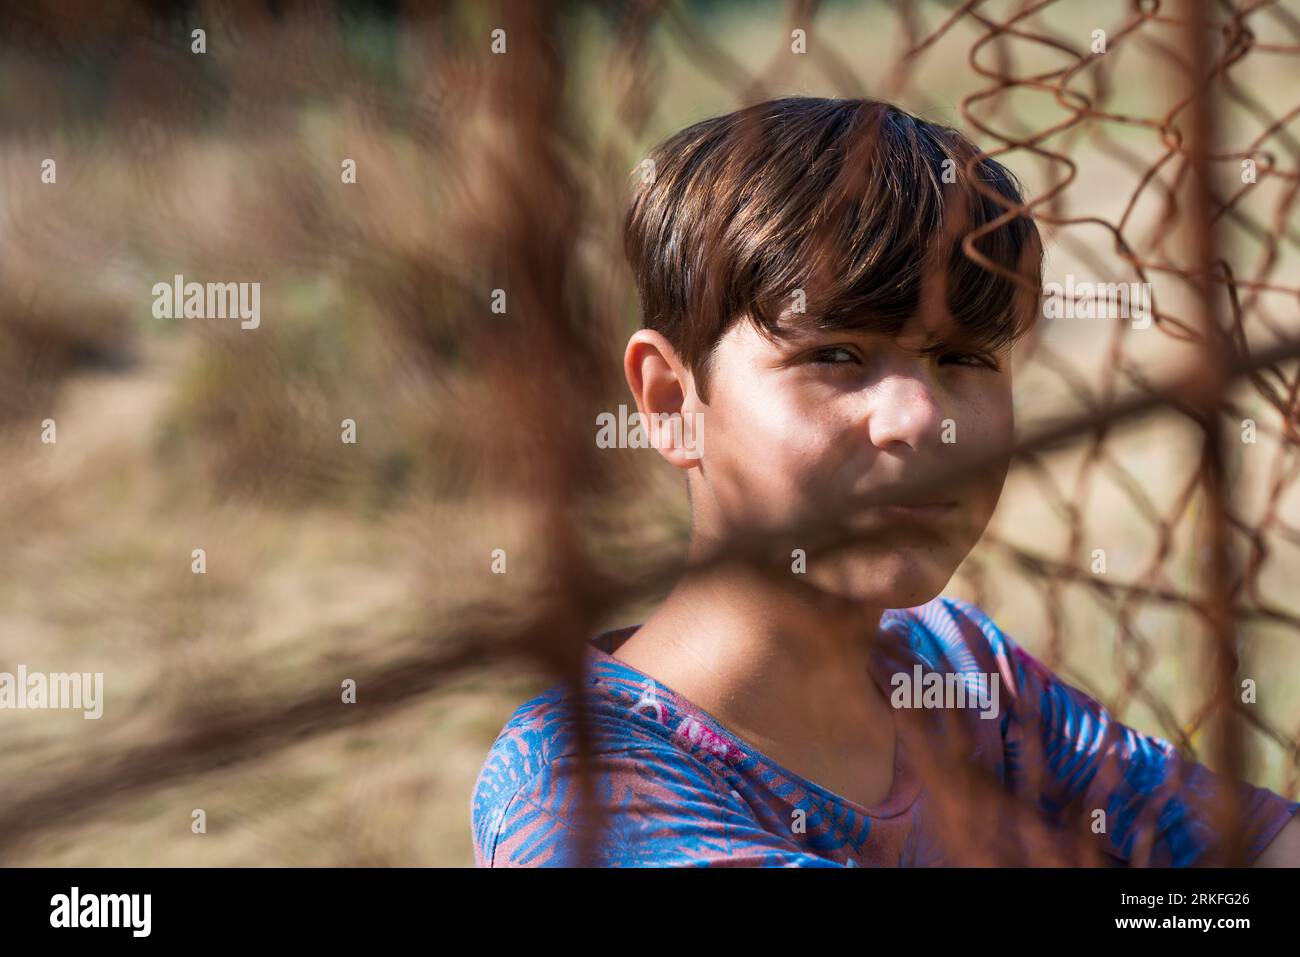 serious teen in casual wear behind metallic fence outdoors Stock Photo